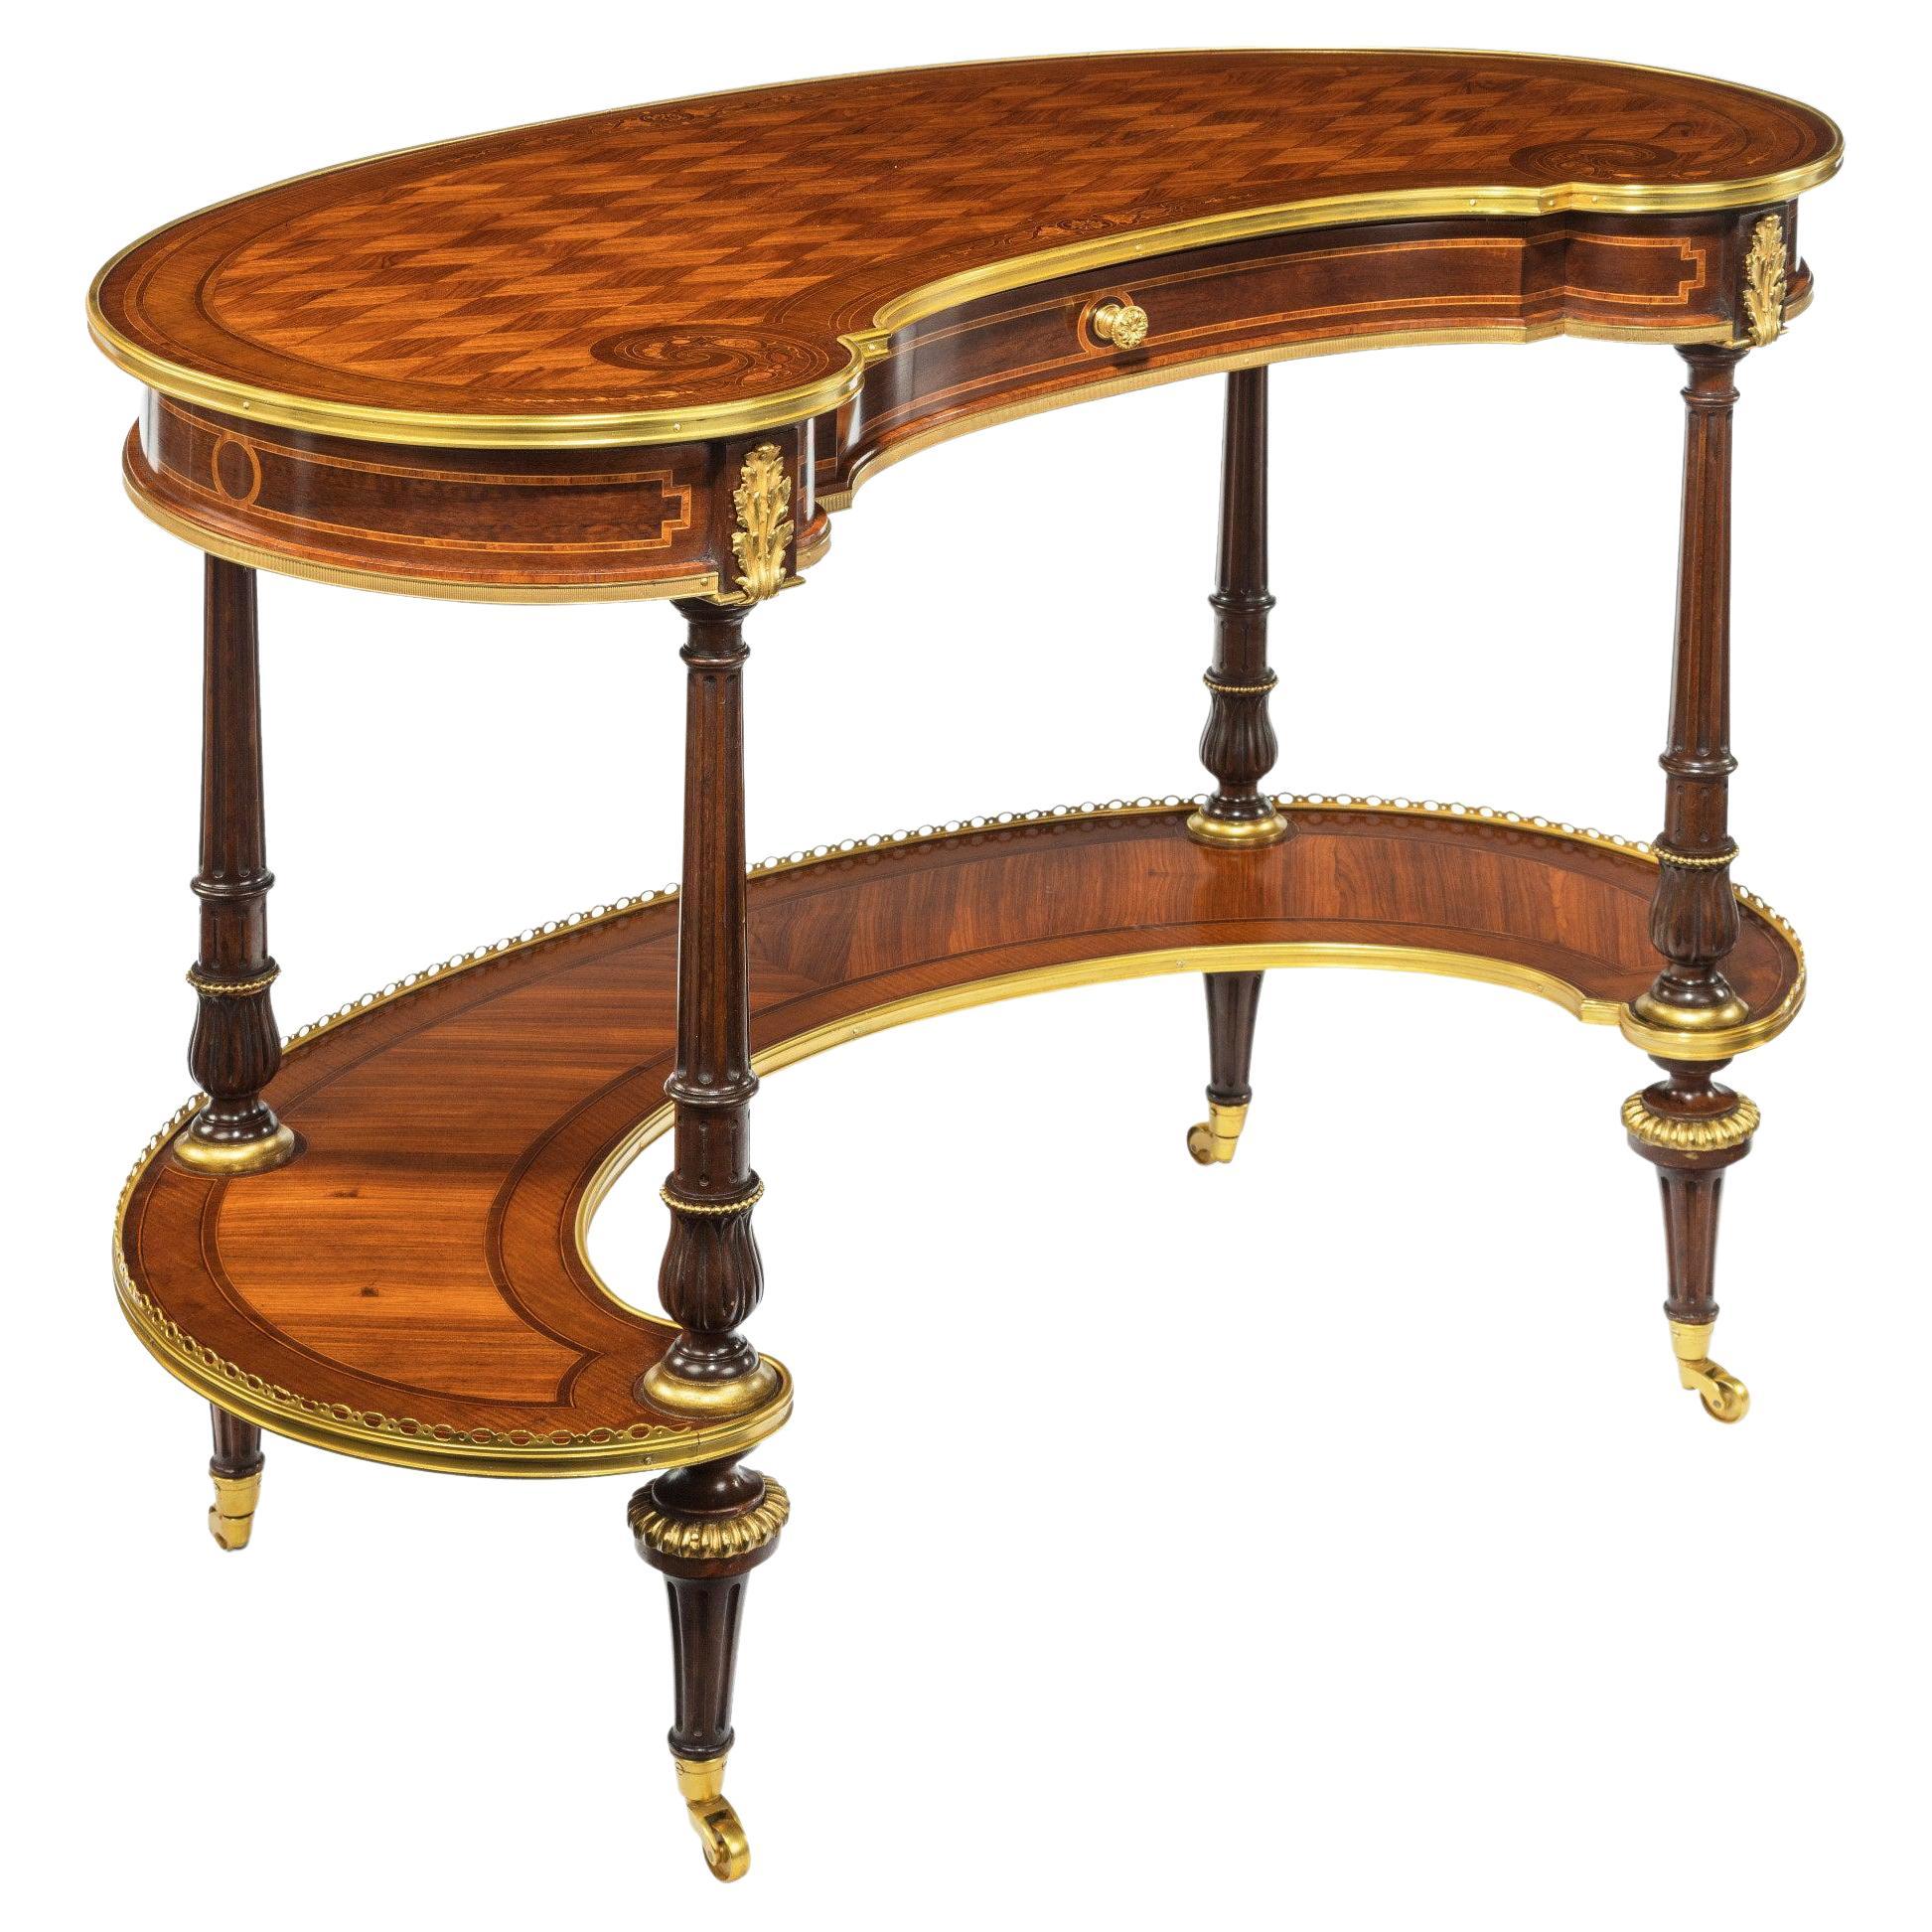 Gillows of Lancaster & London Desks and Writing Tables